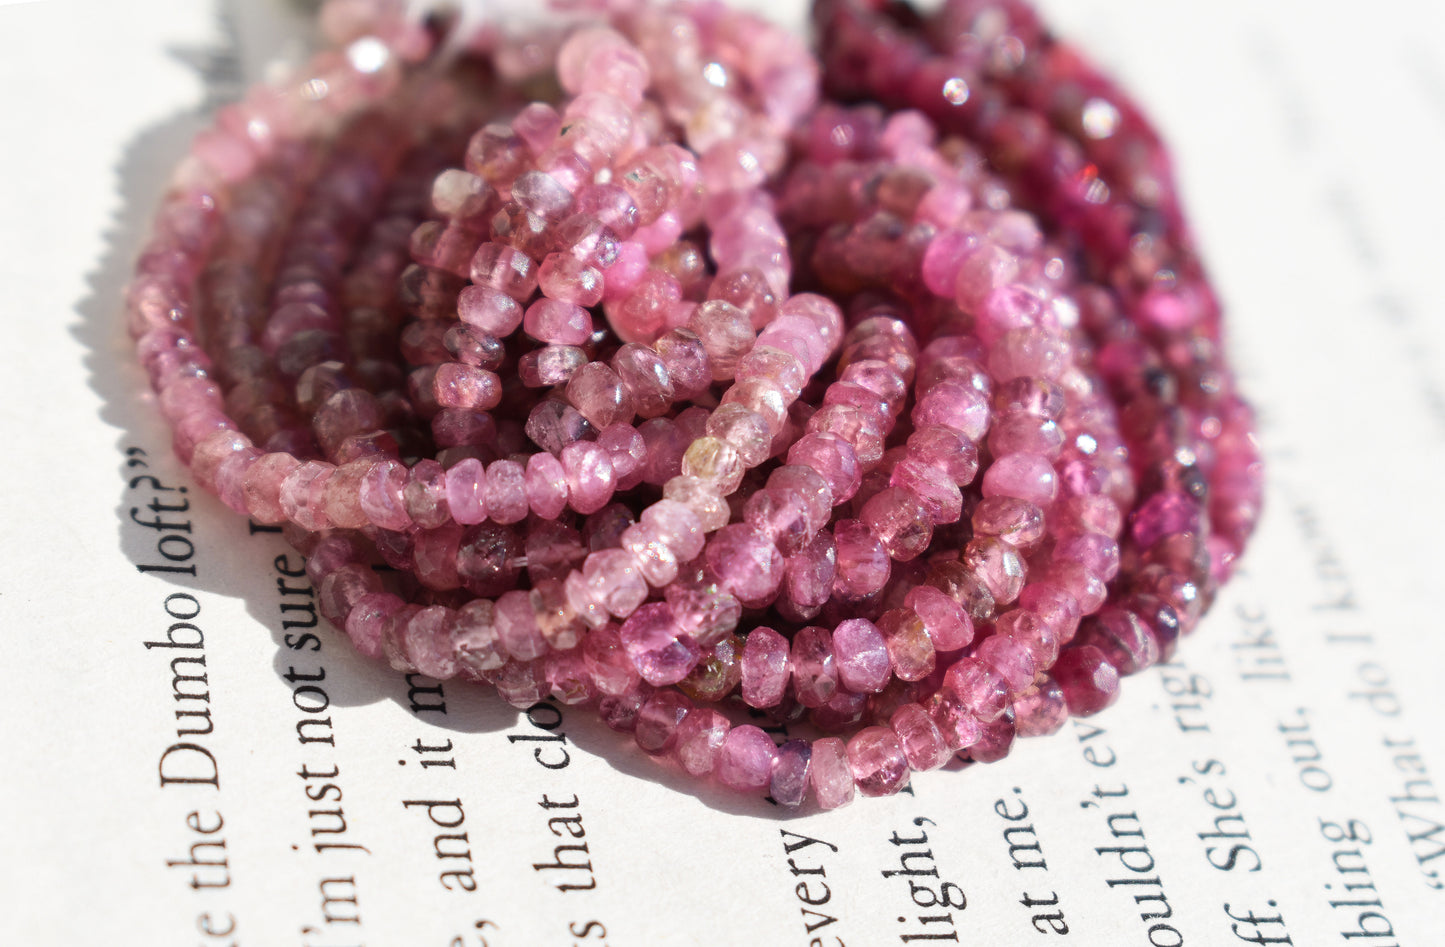 Ombre Pink Tourmaline Rondelle Beads 2.5-3mm x 1-1.5mm